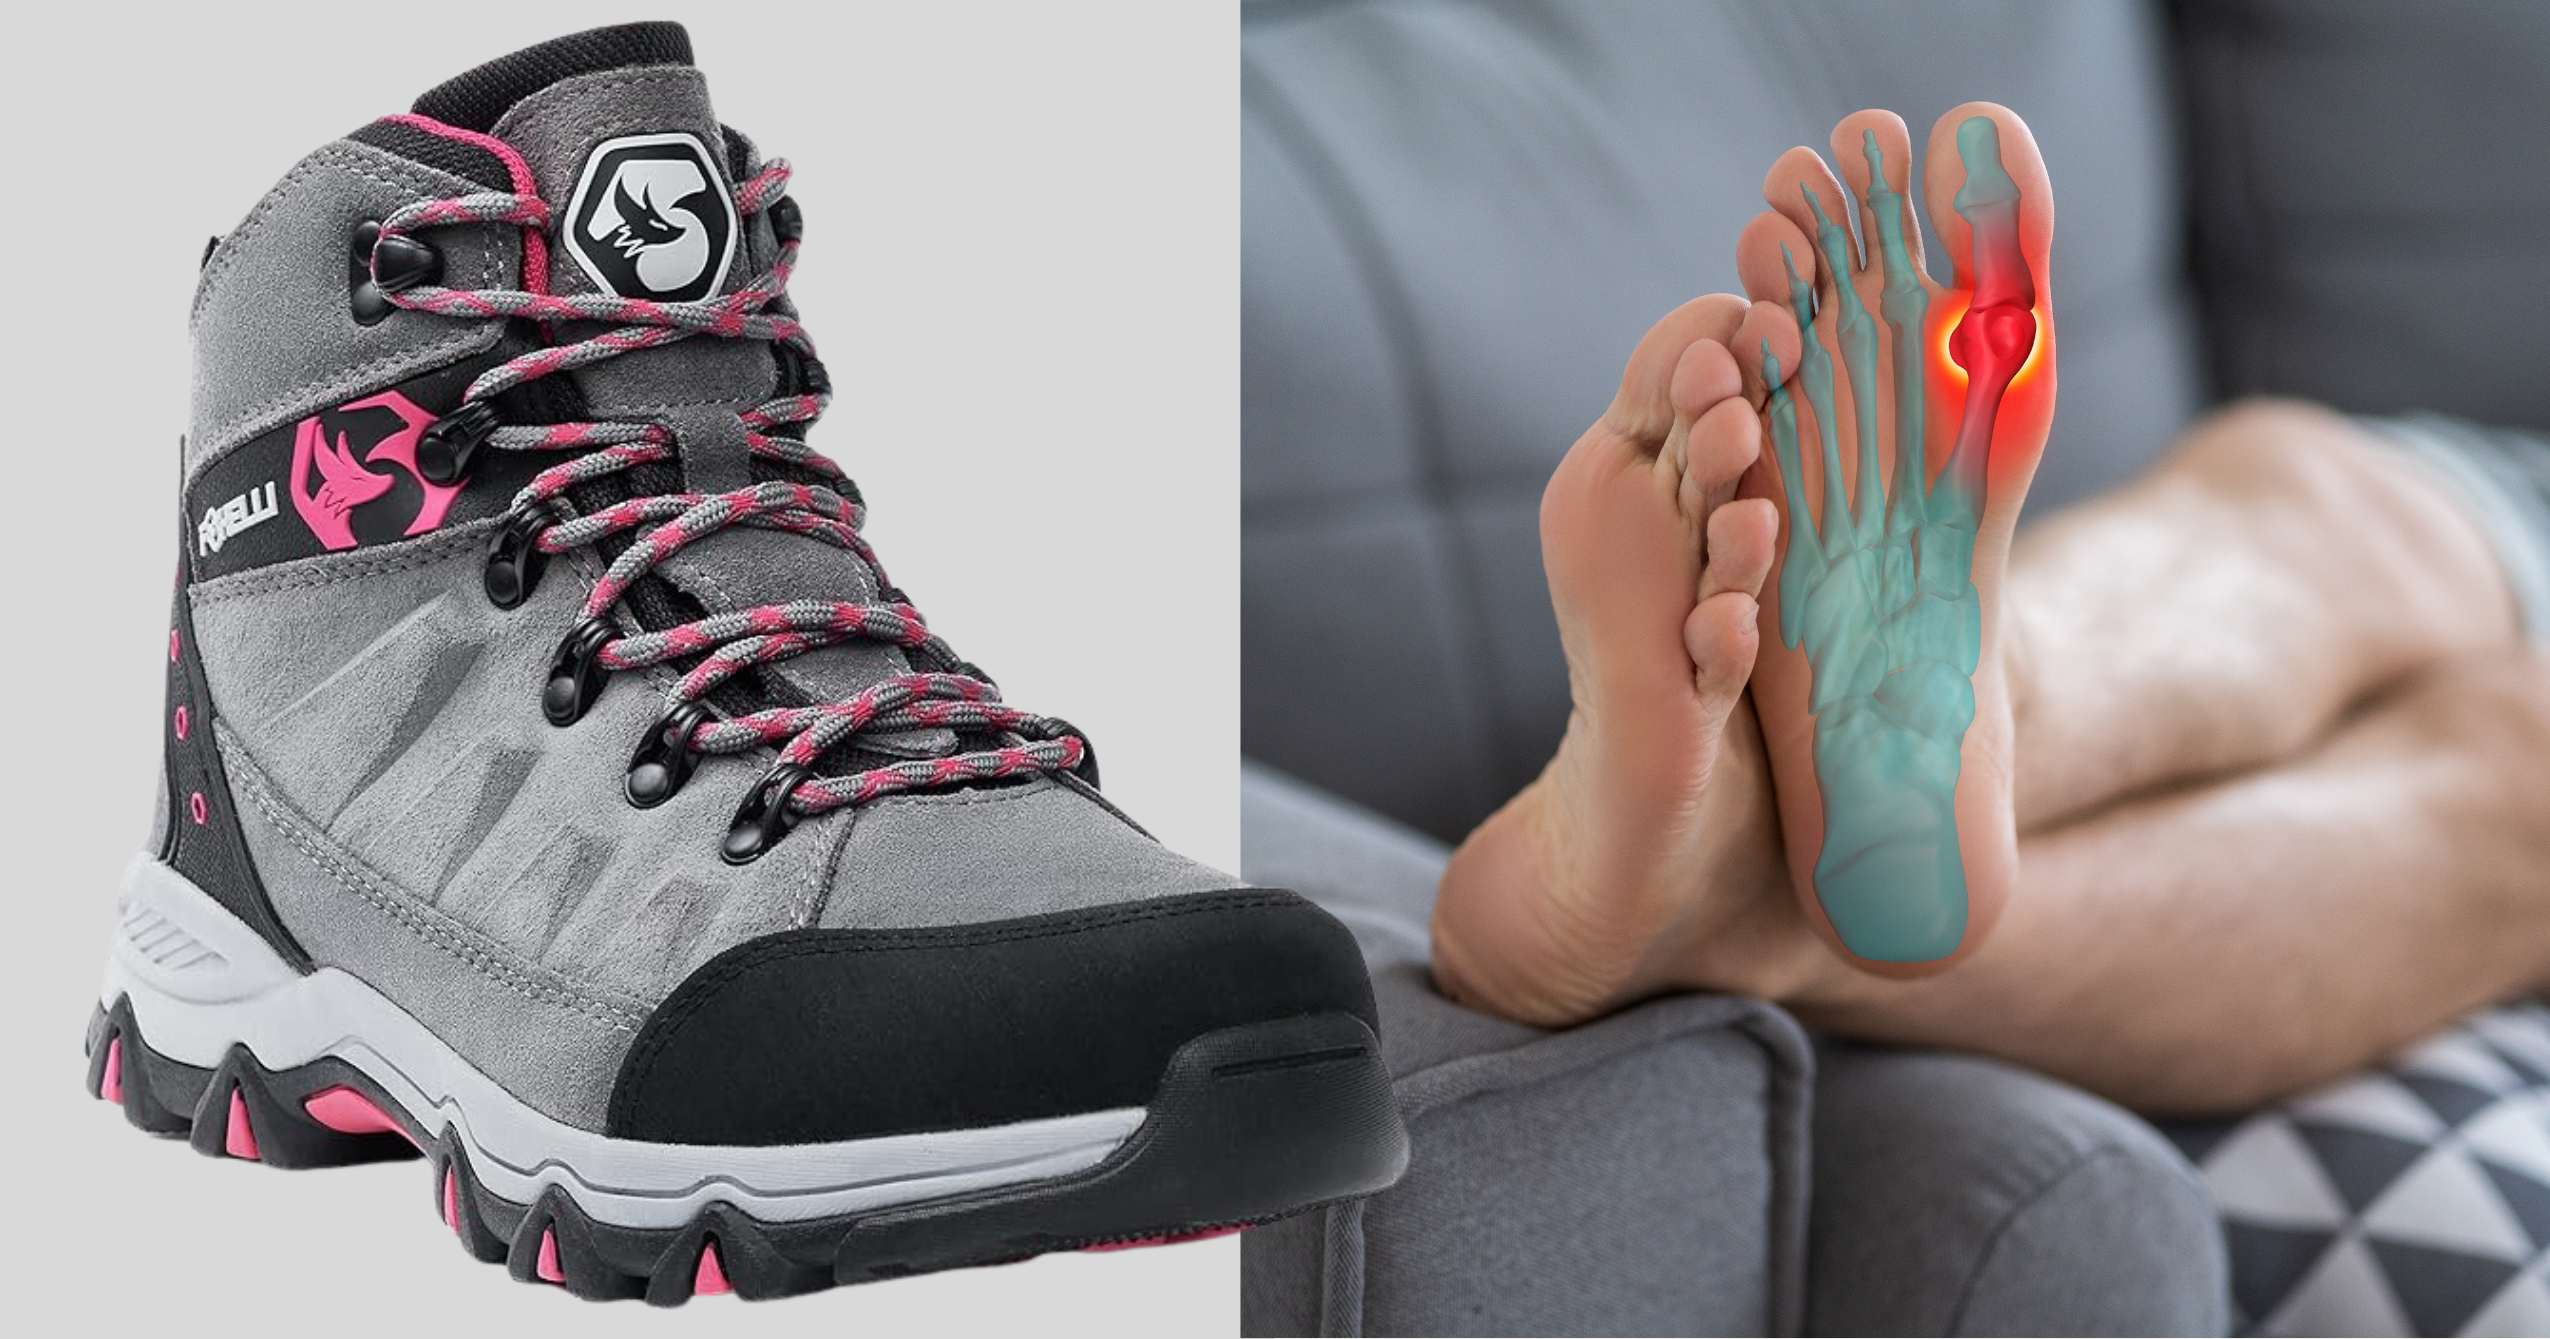 The Ultimate Guide to Best Women’s Hiking Boots for Plantar Fasciitis: Top Picks and Tips